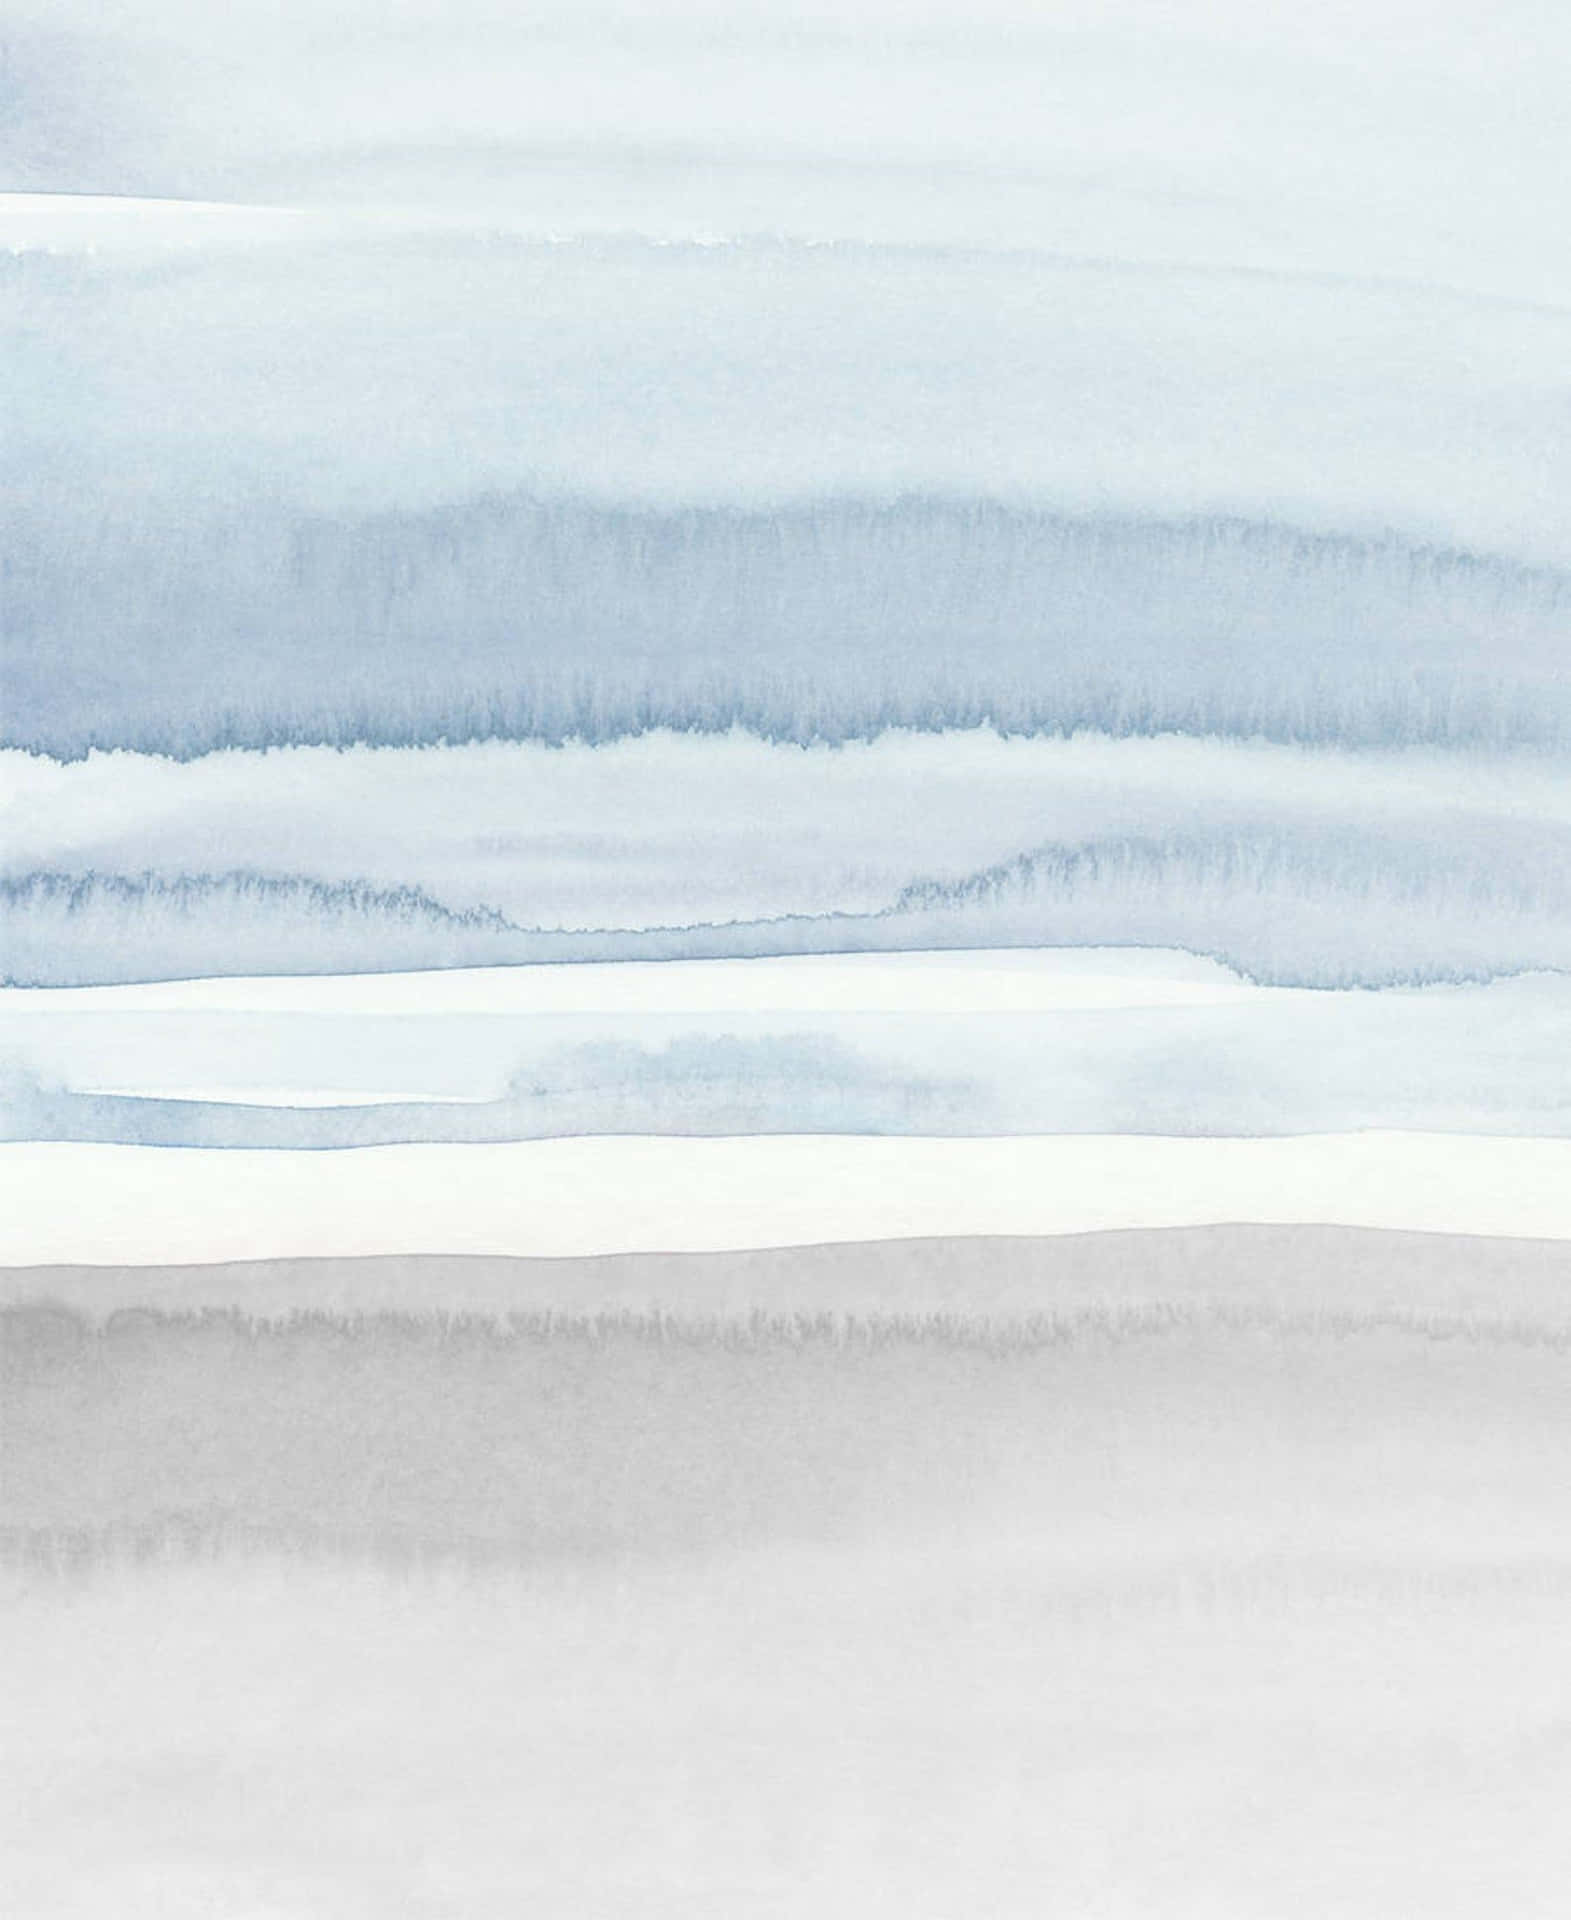 Shades of Blue and Gray combine in a masterful landscape Wallpaper